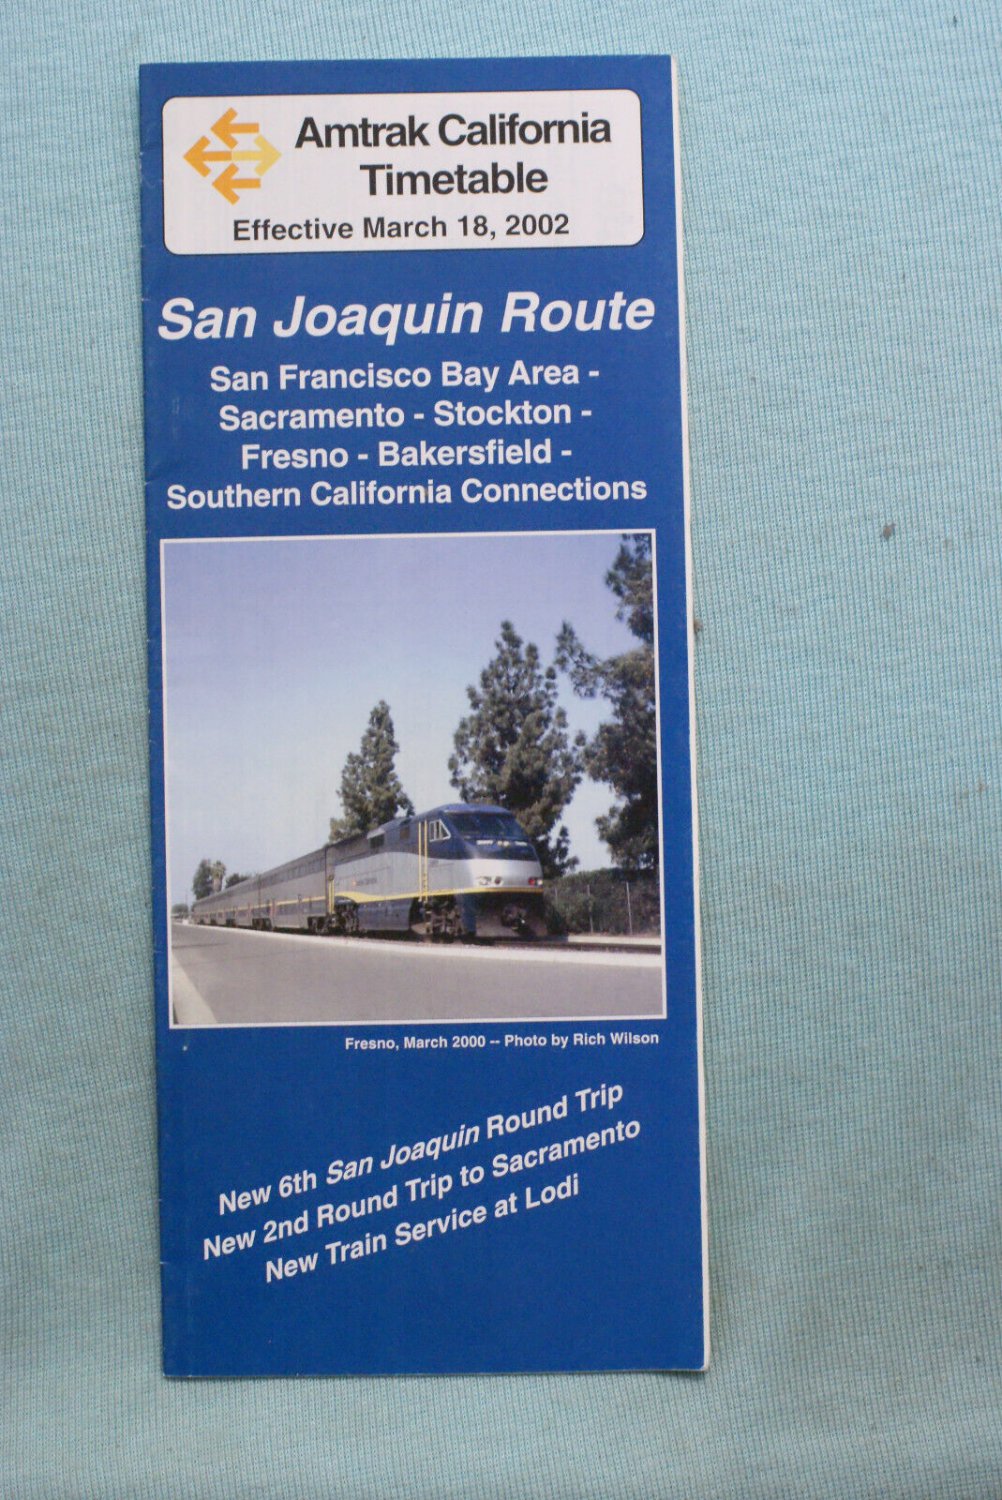 San Joaquin Route - Amtrak Timetable - March 18, 2002